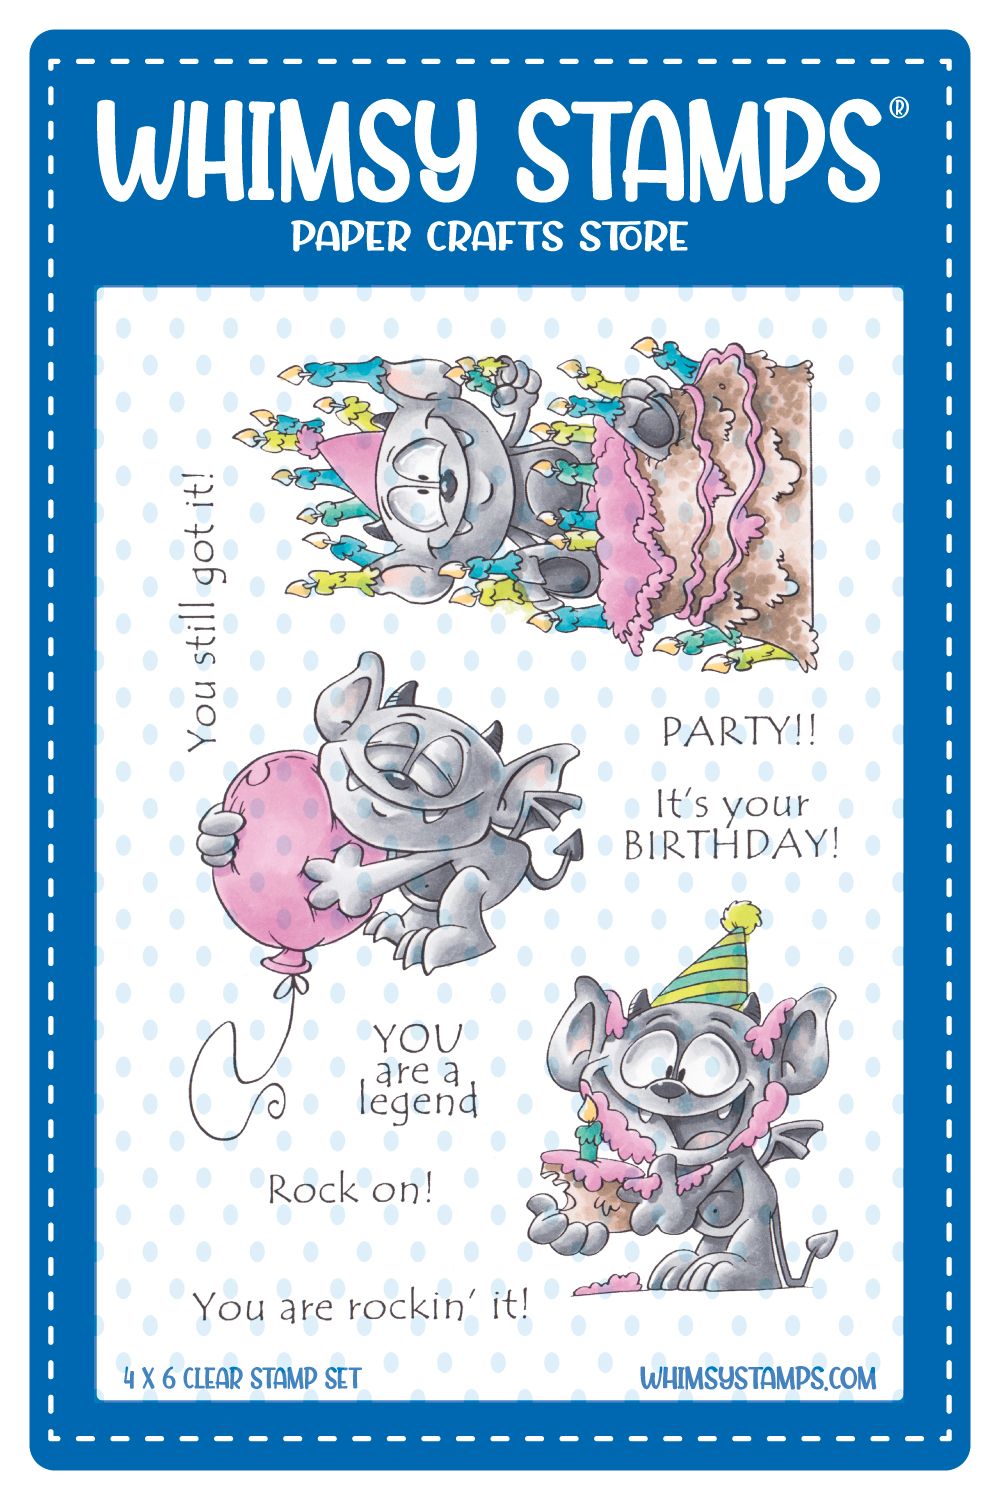 Roaring Birthday Clear Stamps